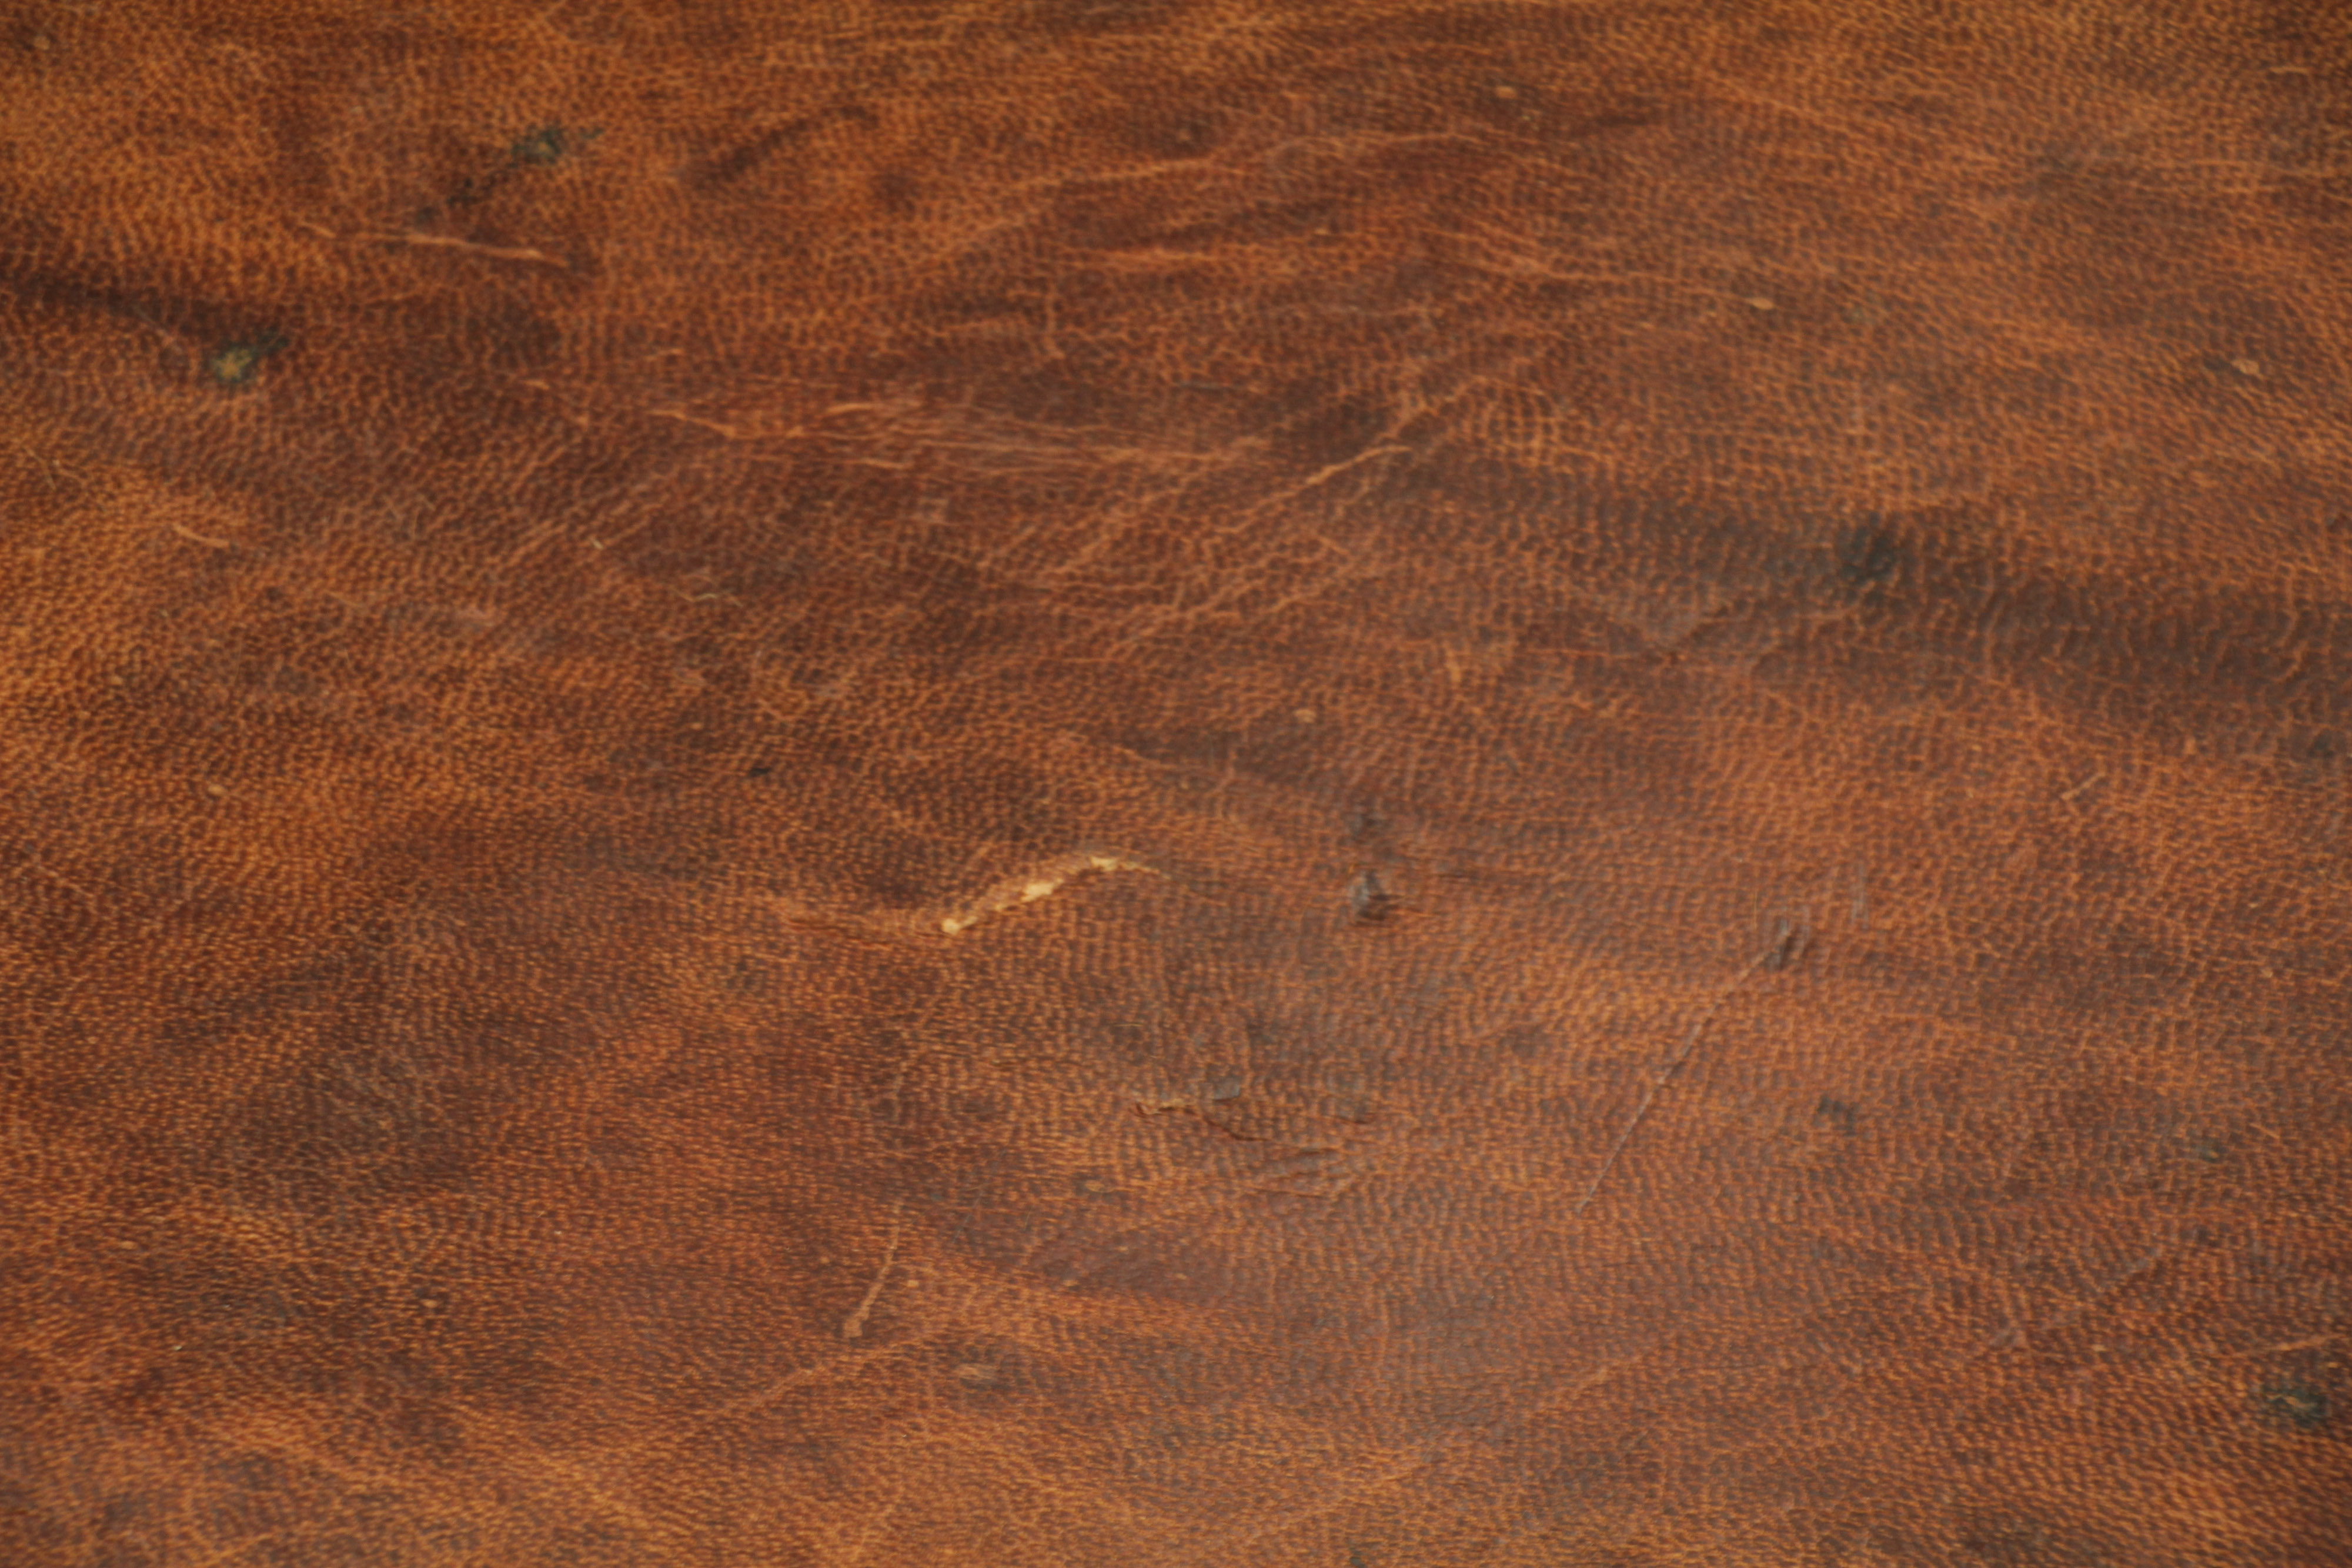 Antique Leather Stain